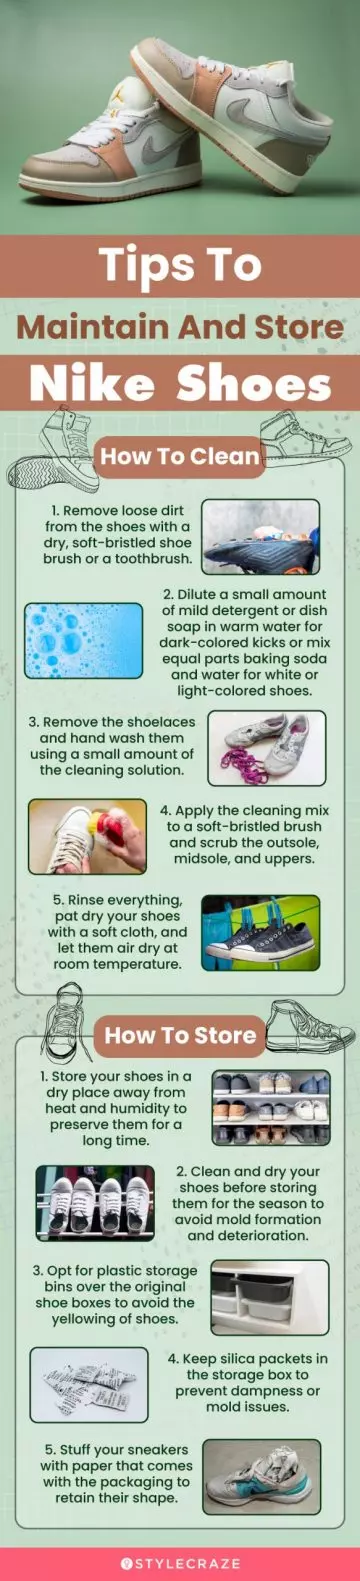 Tips To Maintain And Store Nike Shoes (infographic)